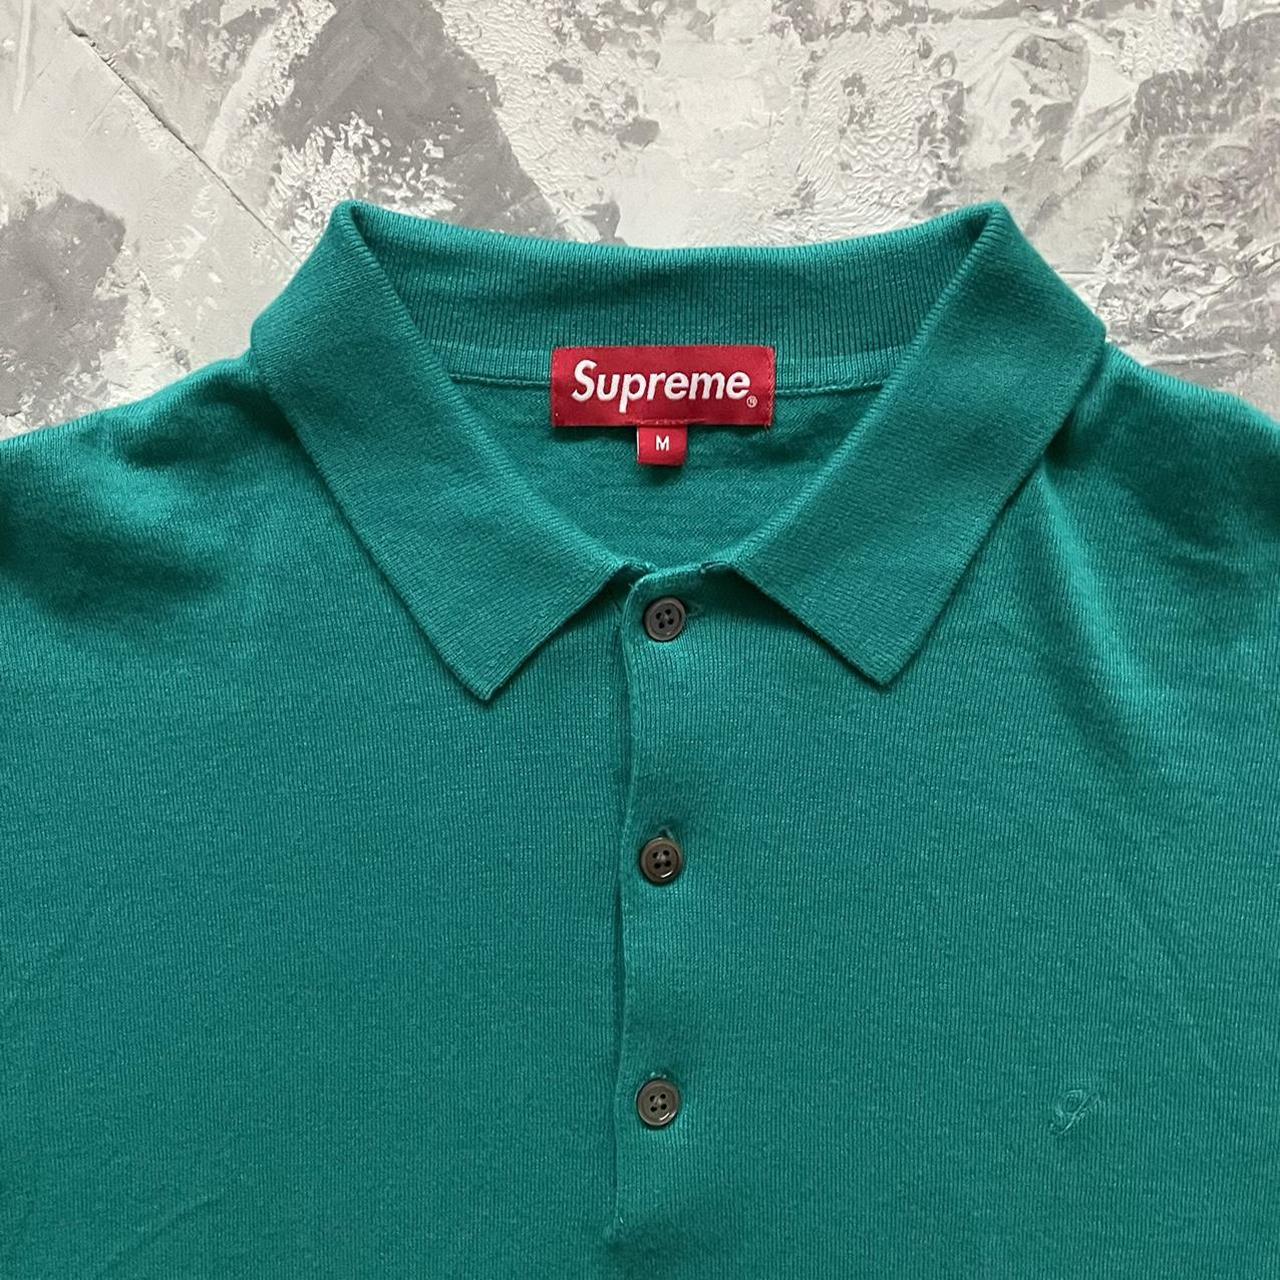 grube overdrive deres Supreme Teal Knit Polo Medium From Summer 2017... - Depop